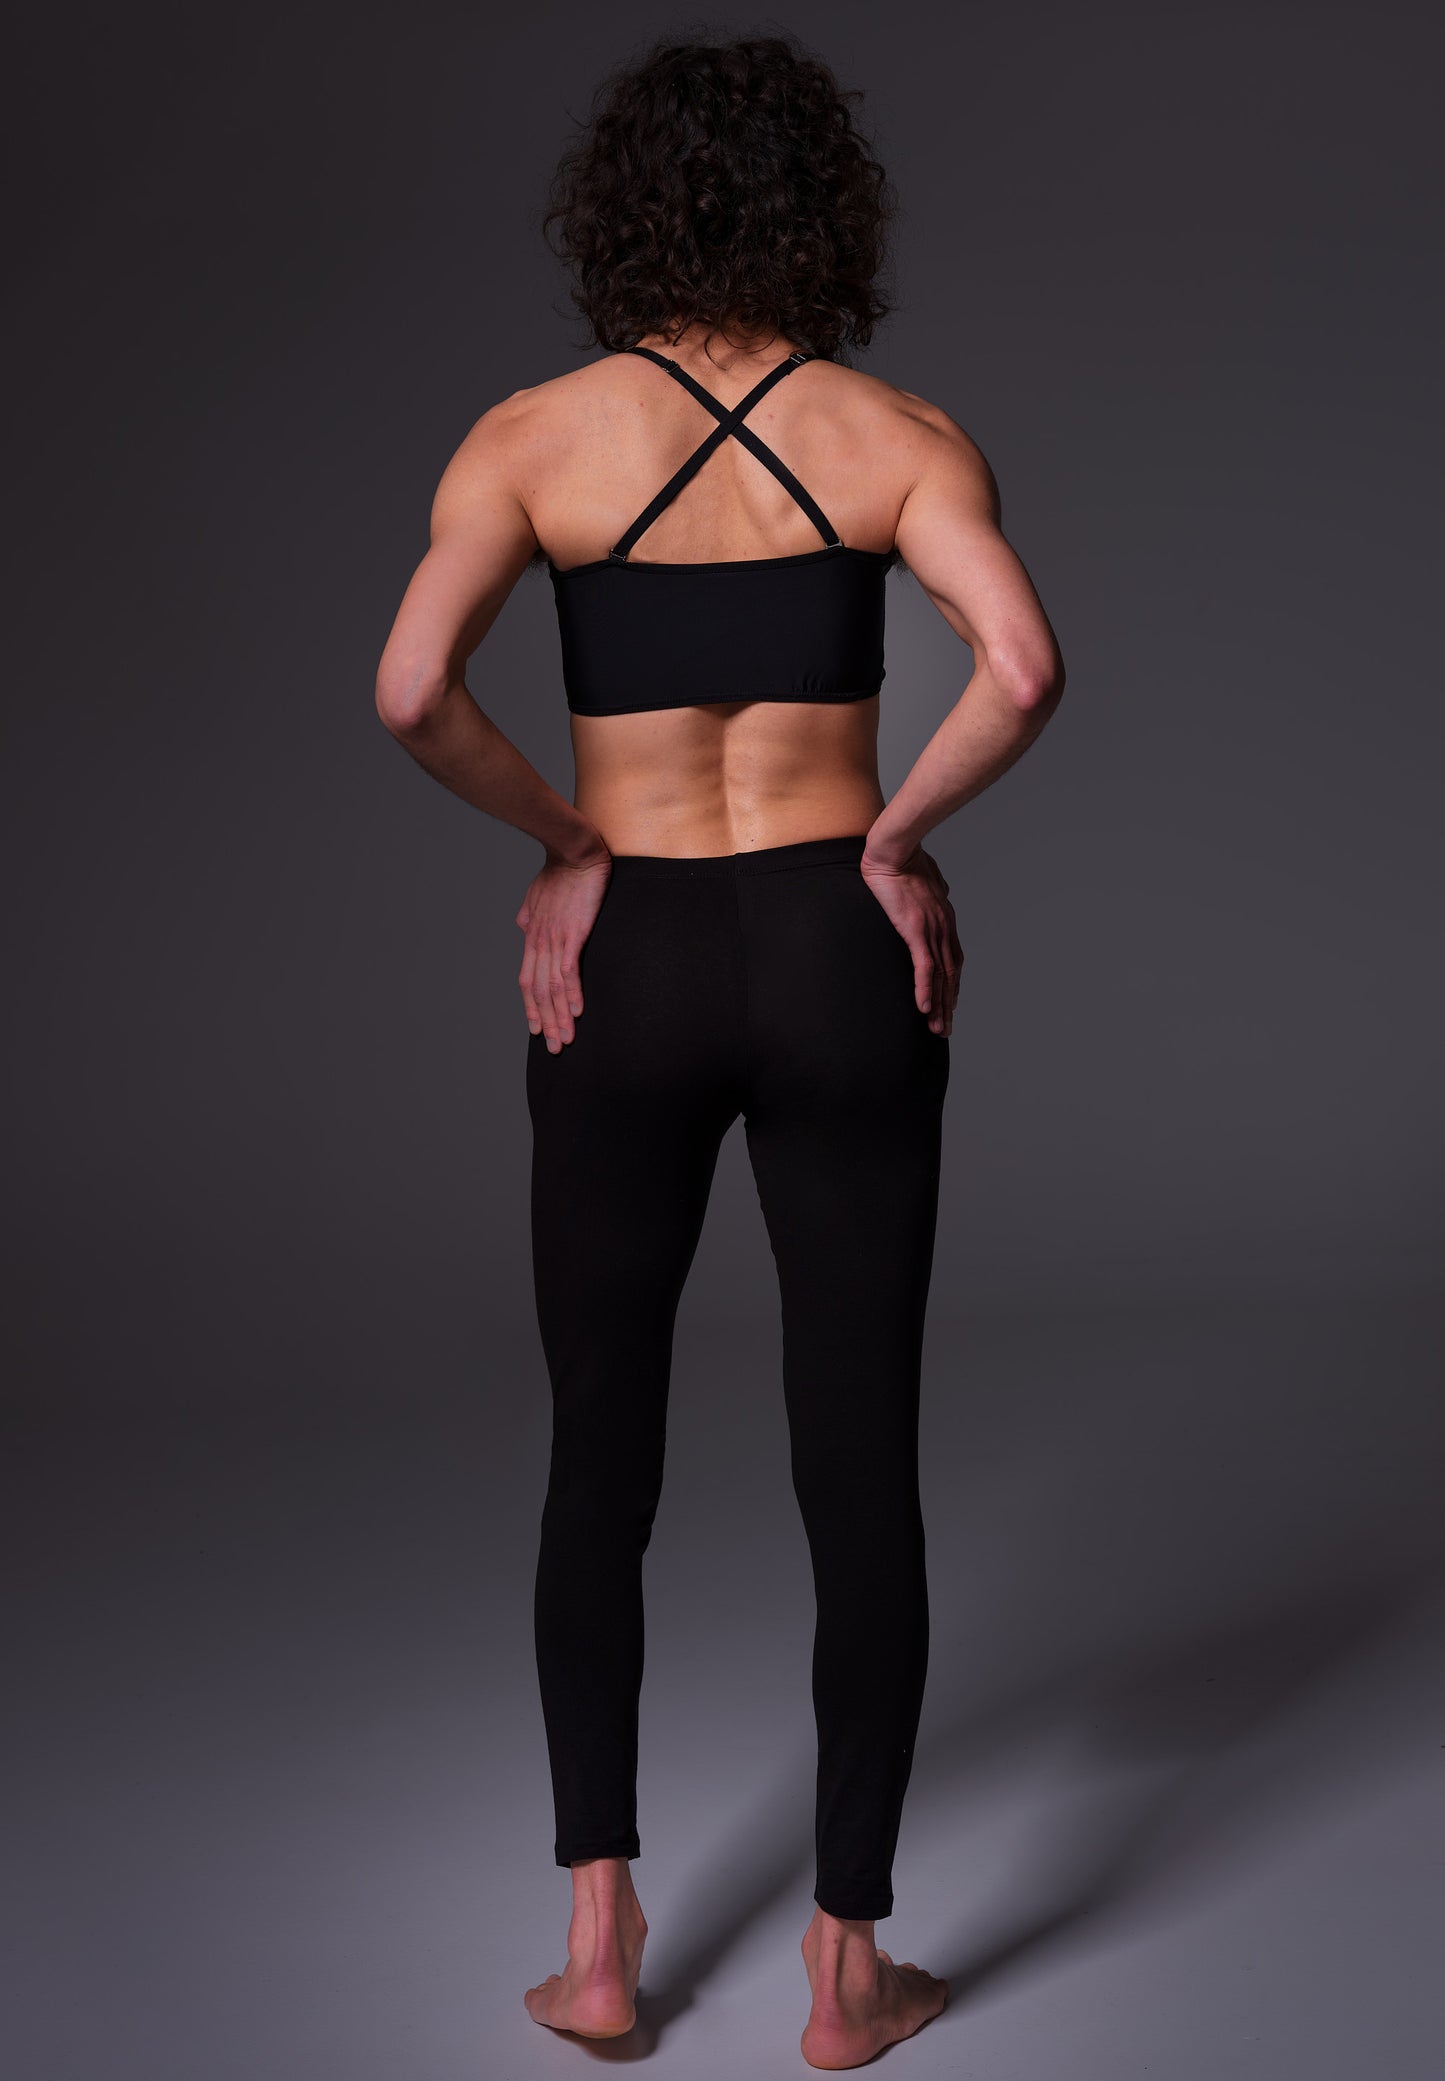 Riah seen from the back wearing the Sporttop Advanced black